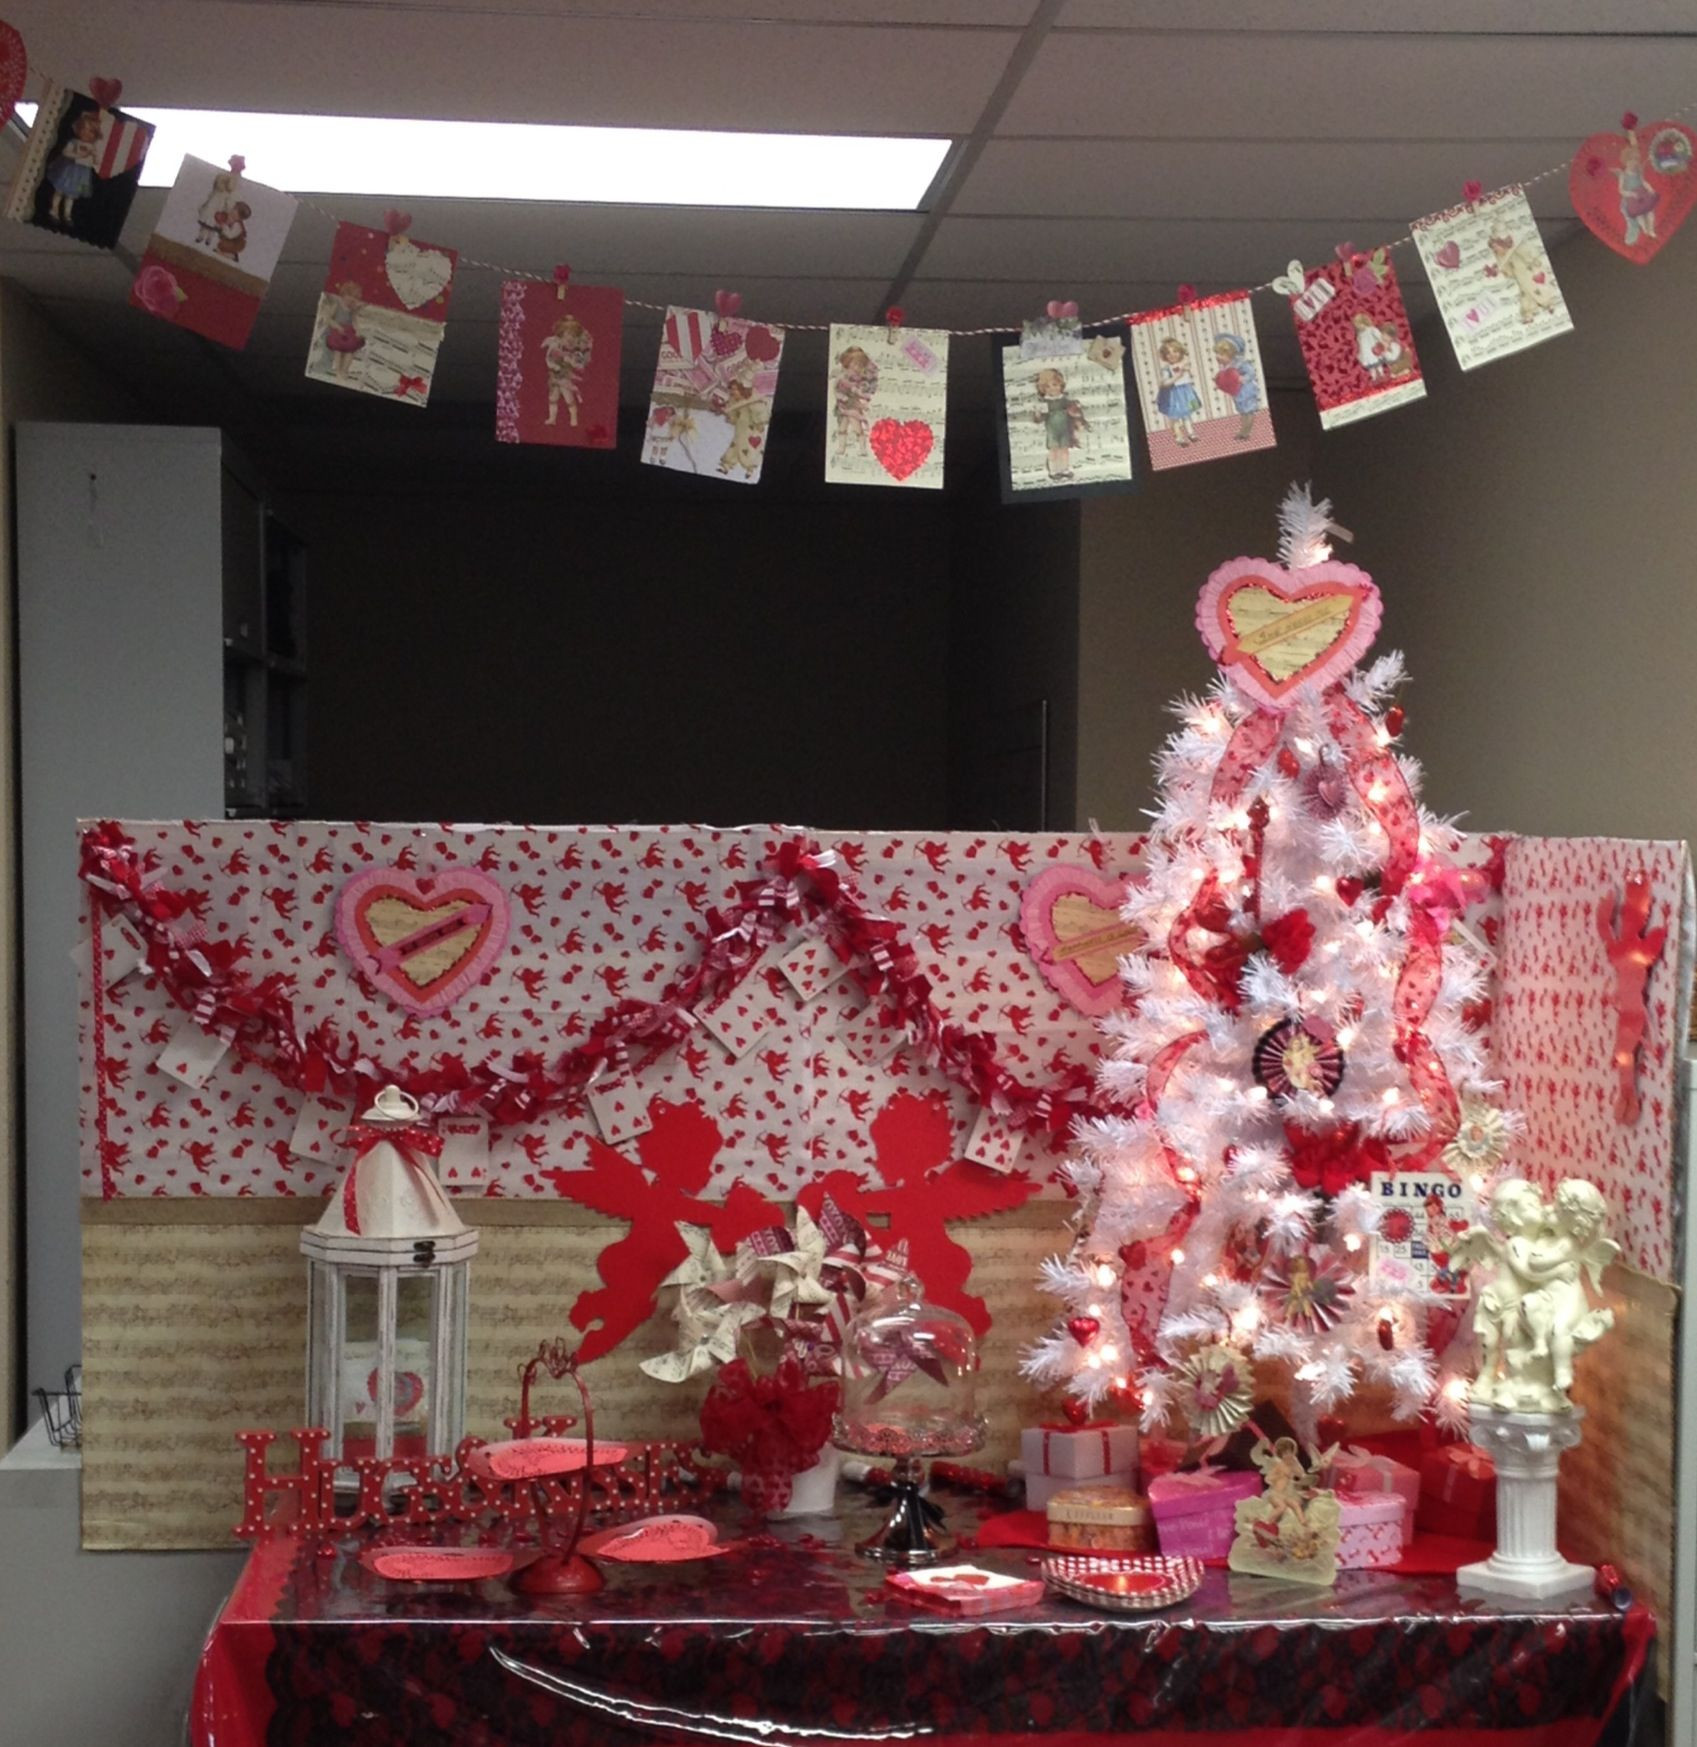 Valentine Gift Ideas For The Office
 My office potluck decorations Thank you Pinterest for the